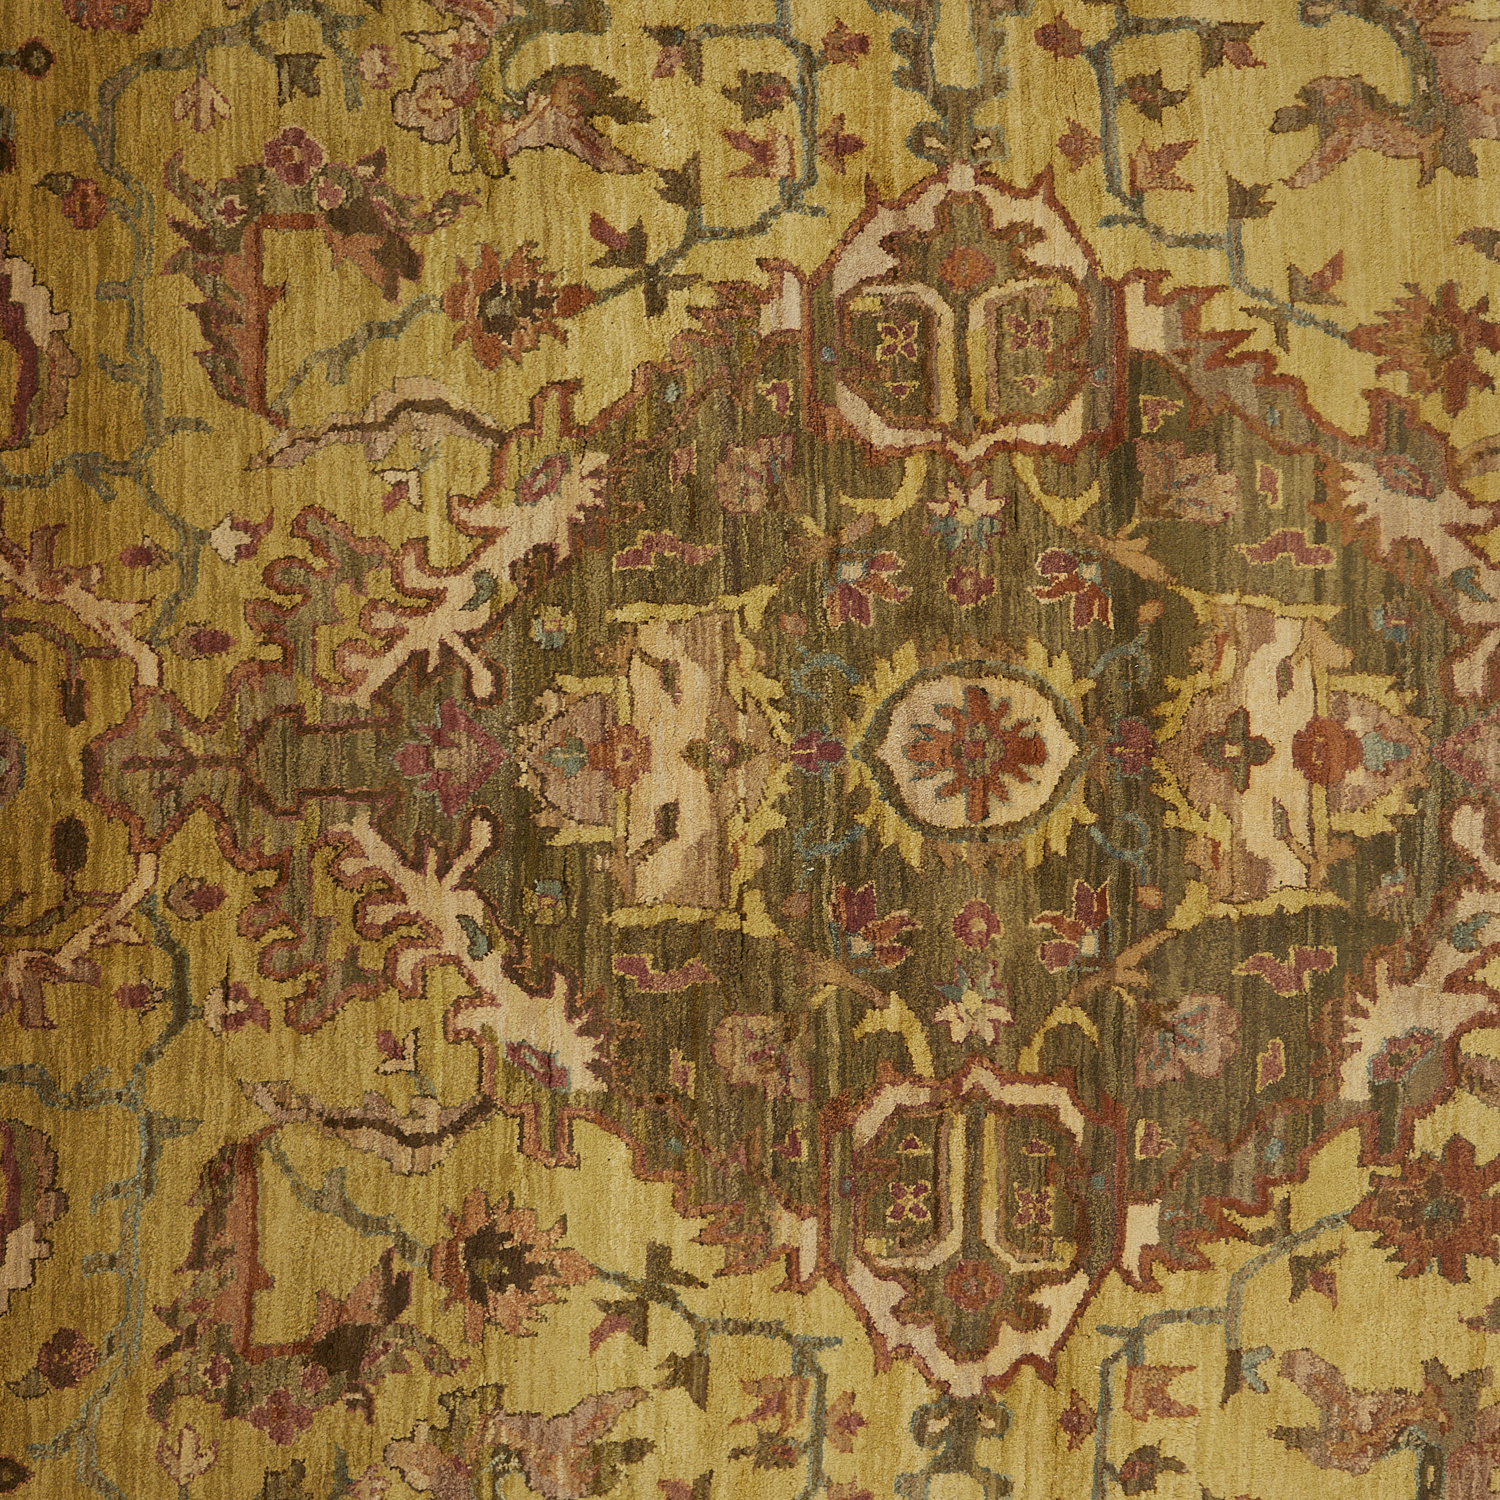 Palace Size Persian Feraghan Rug 15' x 11'9" - Image 5 of 8